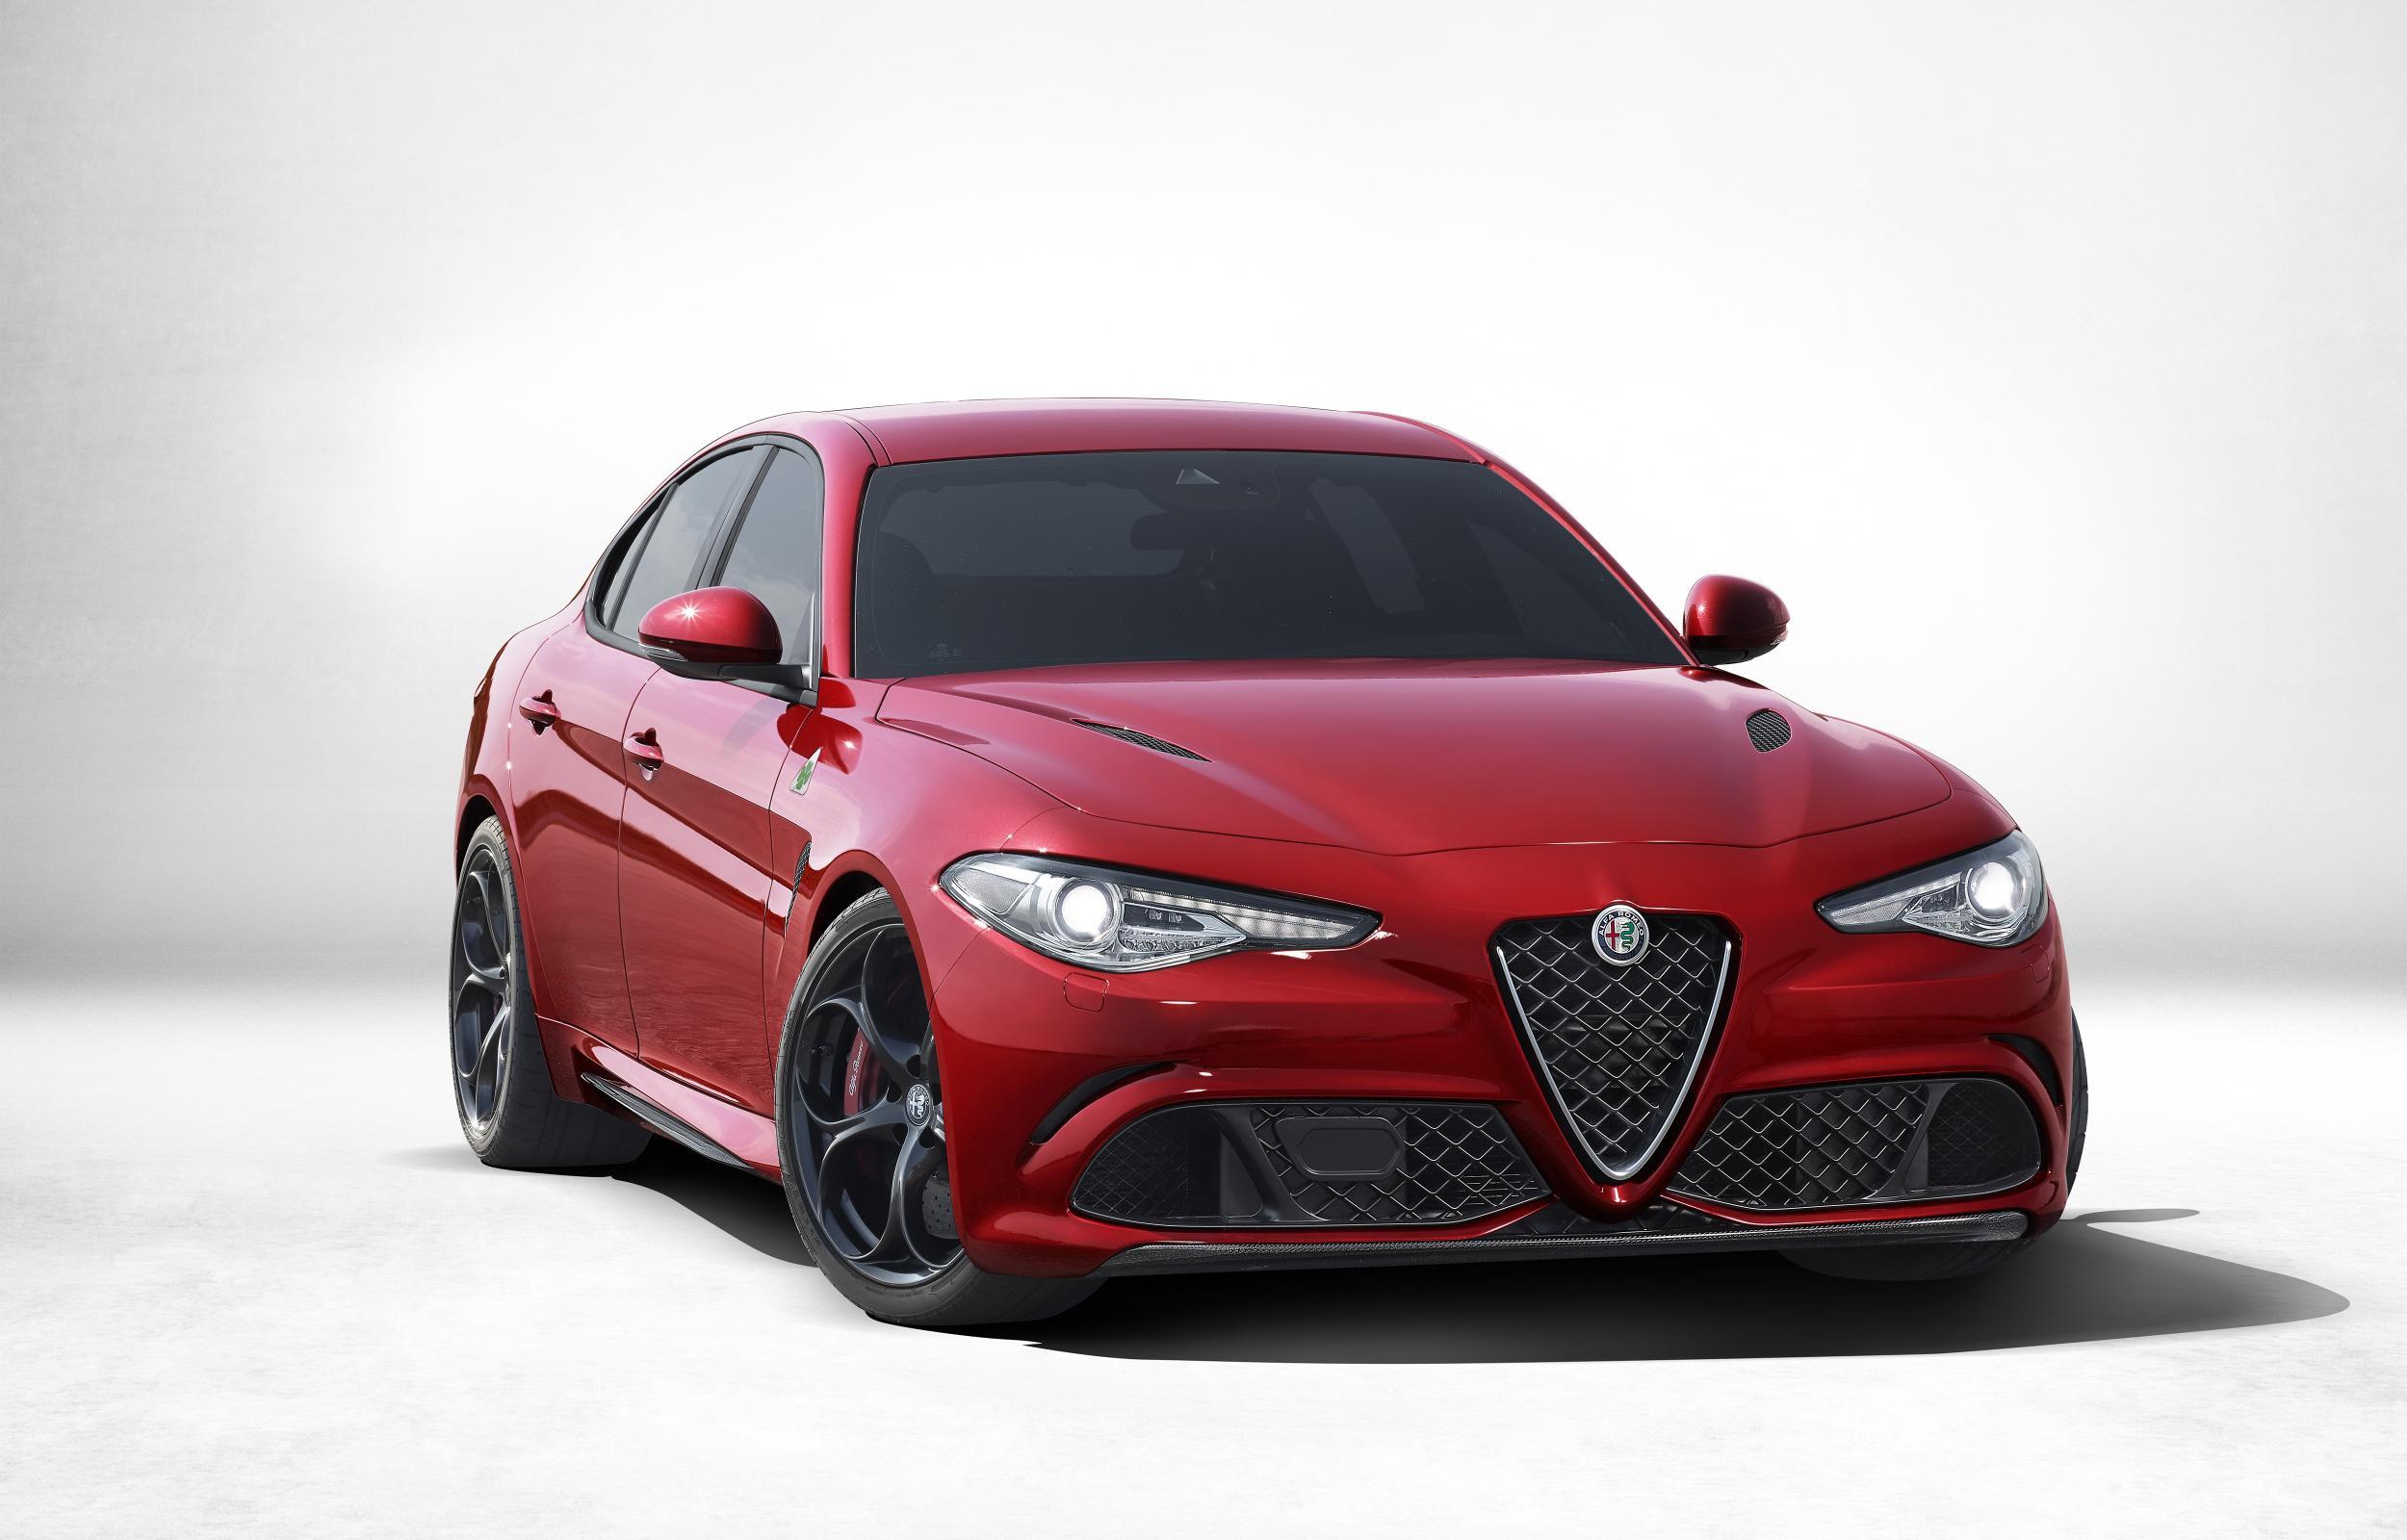 Alfa Romeo Giulia's Big Brother Could Be Scrapped For Mysterious